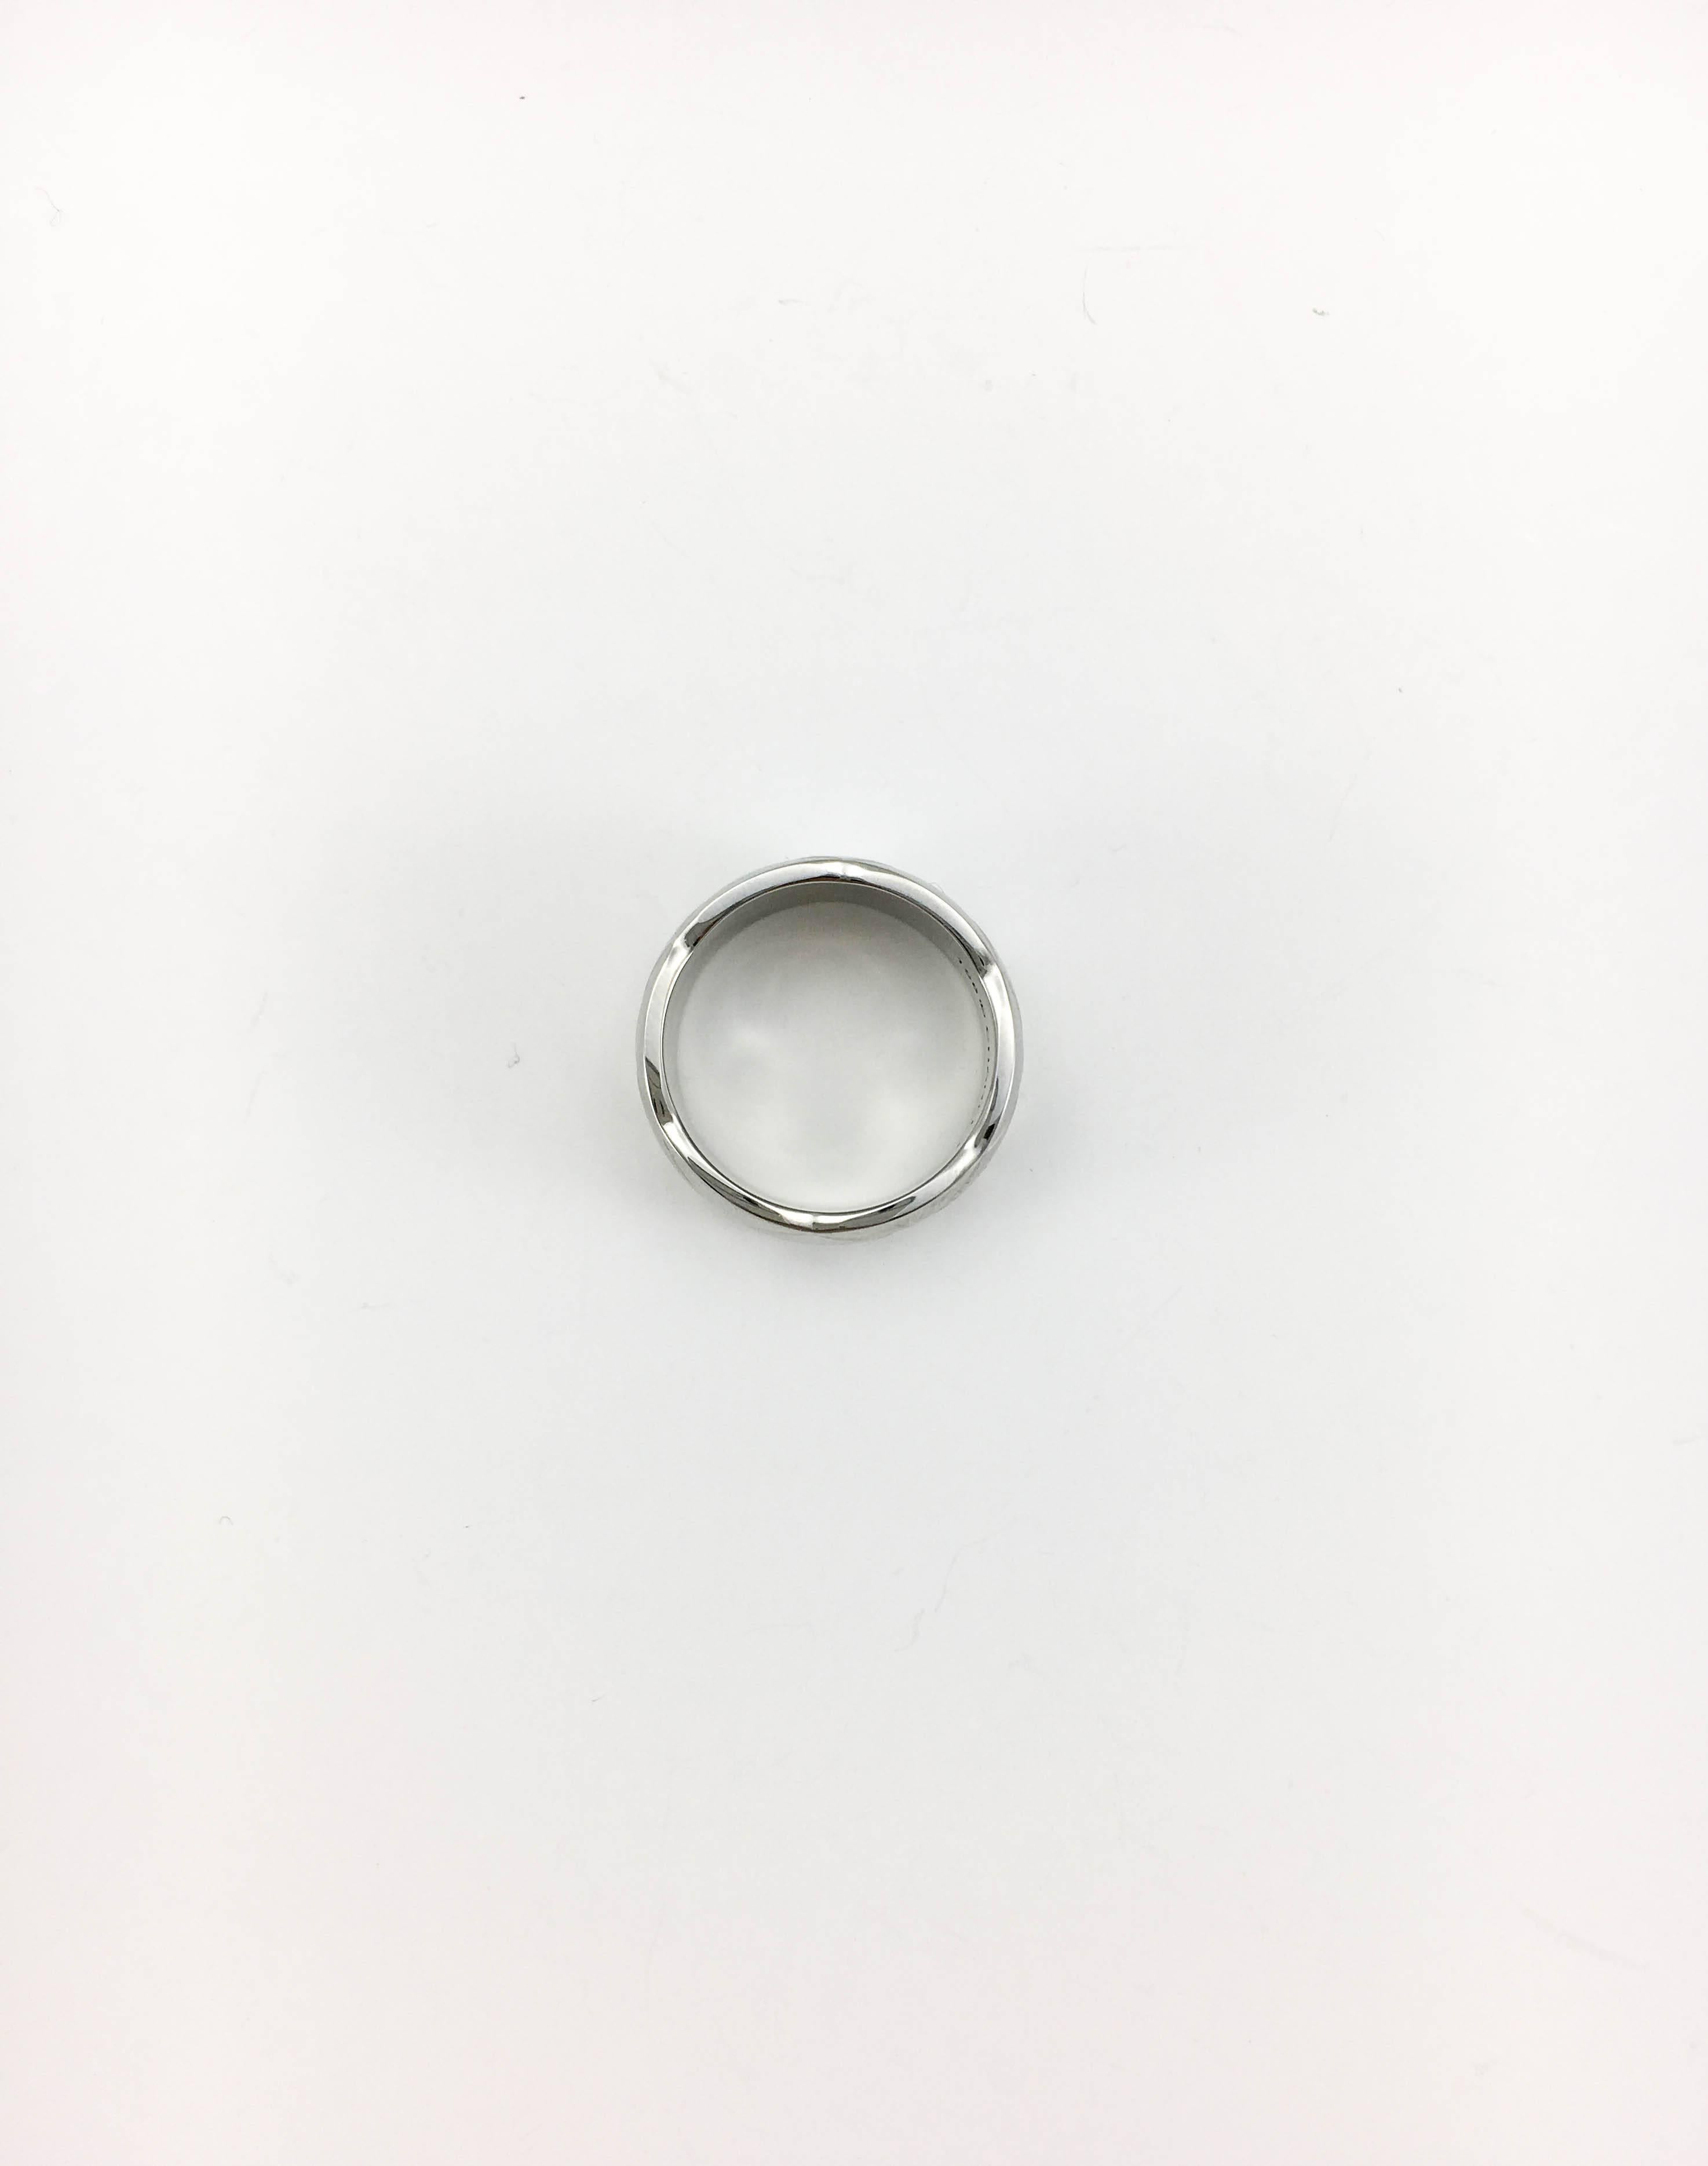 Chanel 'Coco Crush' White Gold Ring In Excellent Condition In London, Chelsea